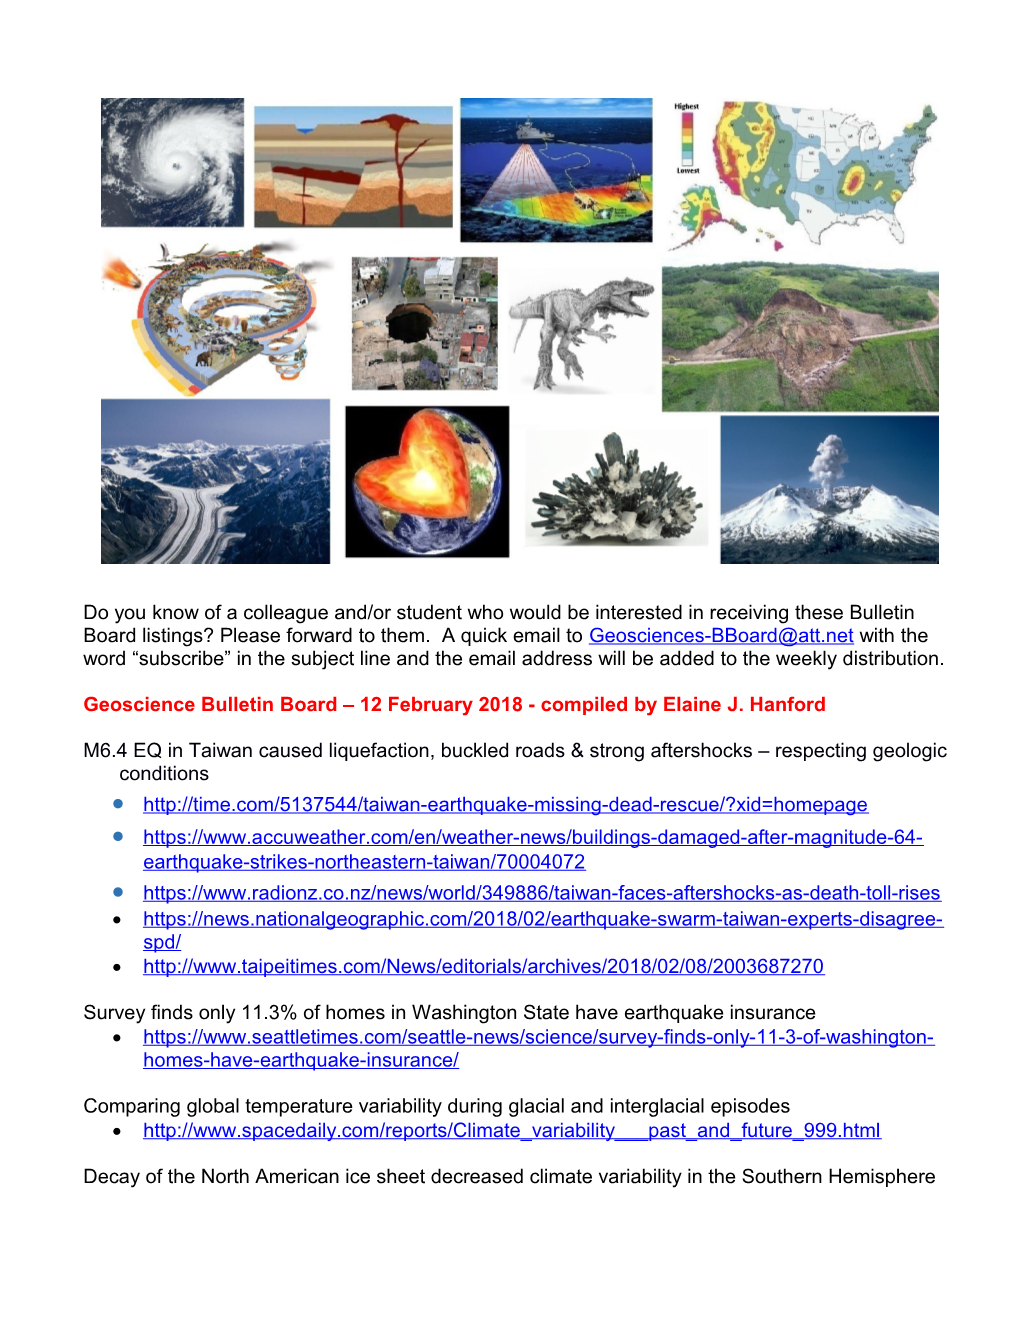 Geoscience Bulletin Board 12 February 2018- Compiled by Elaine J. Hanford